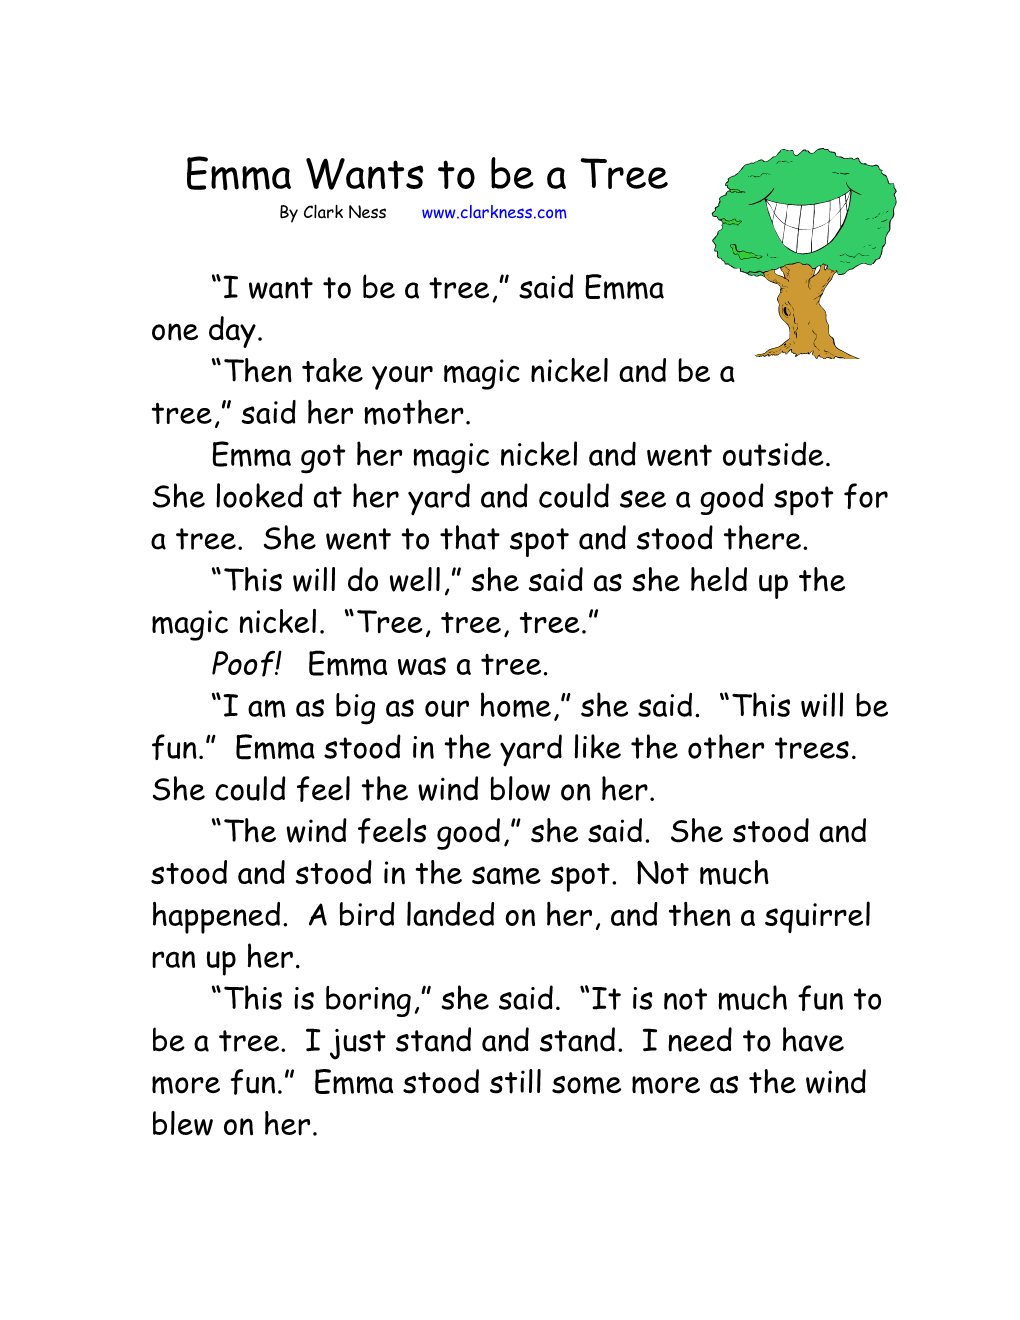 Then Take Your Magic Nickel and Be a Tree, Said Her Mother